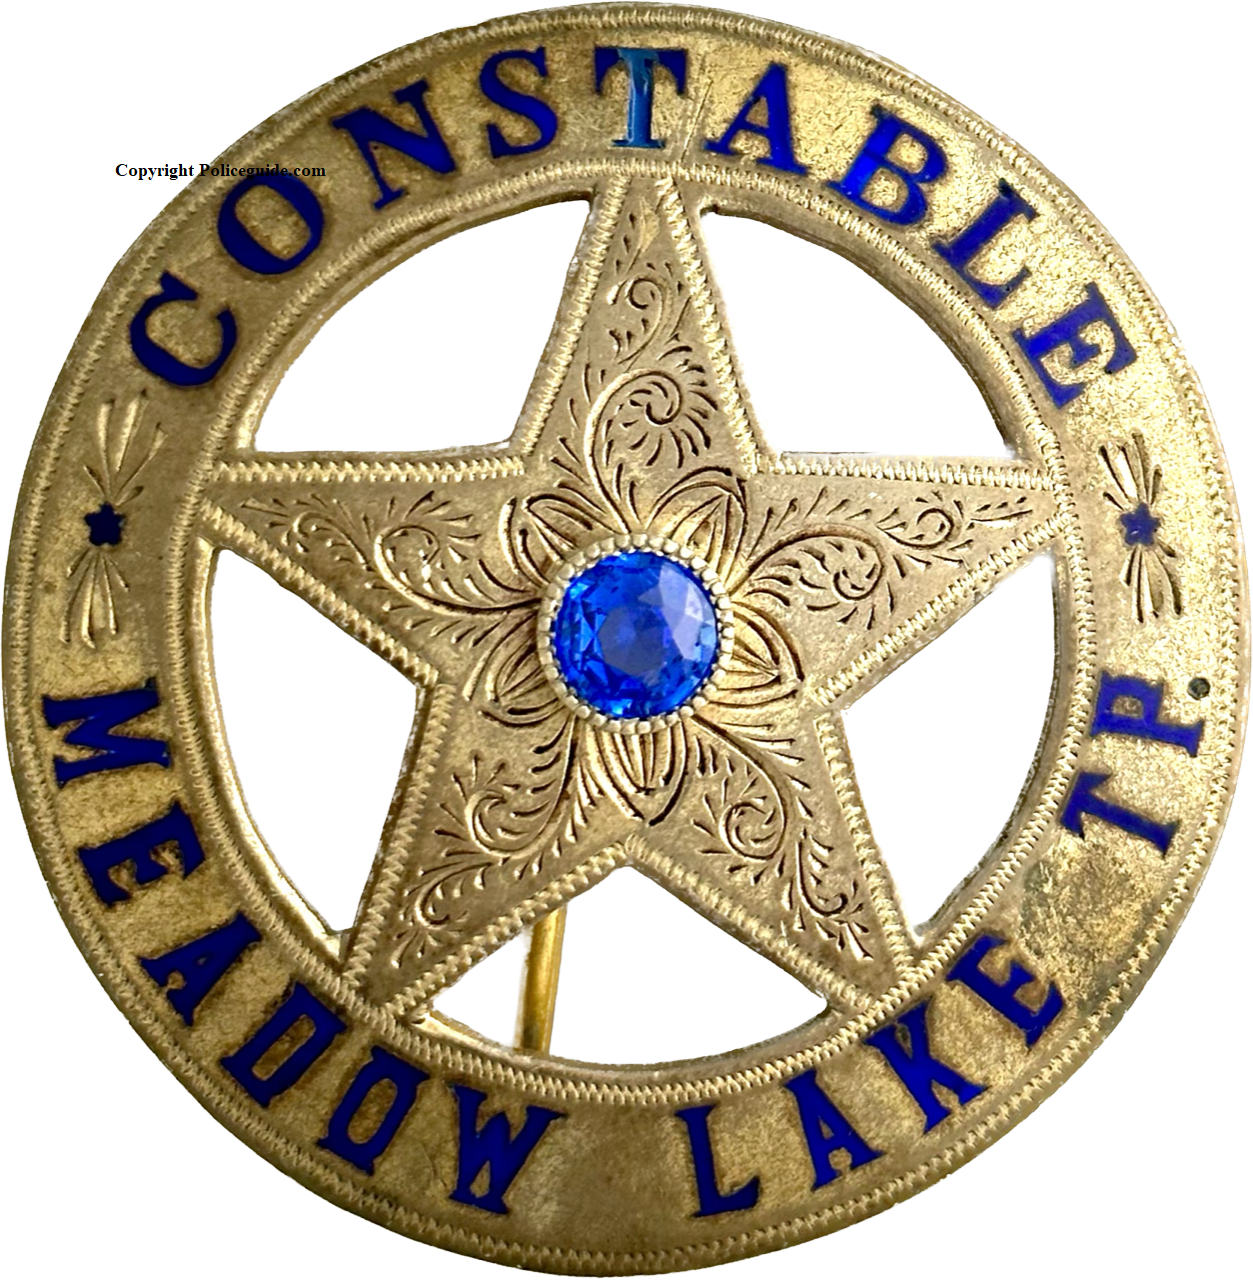 Constable Meadow Lake Township (Truckee, CA) hallmarked by J. C. Irvine 1886.  Last worn by August Schulmpf